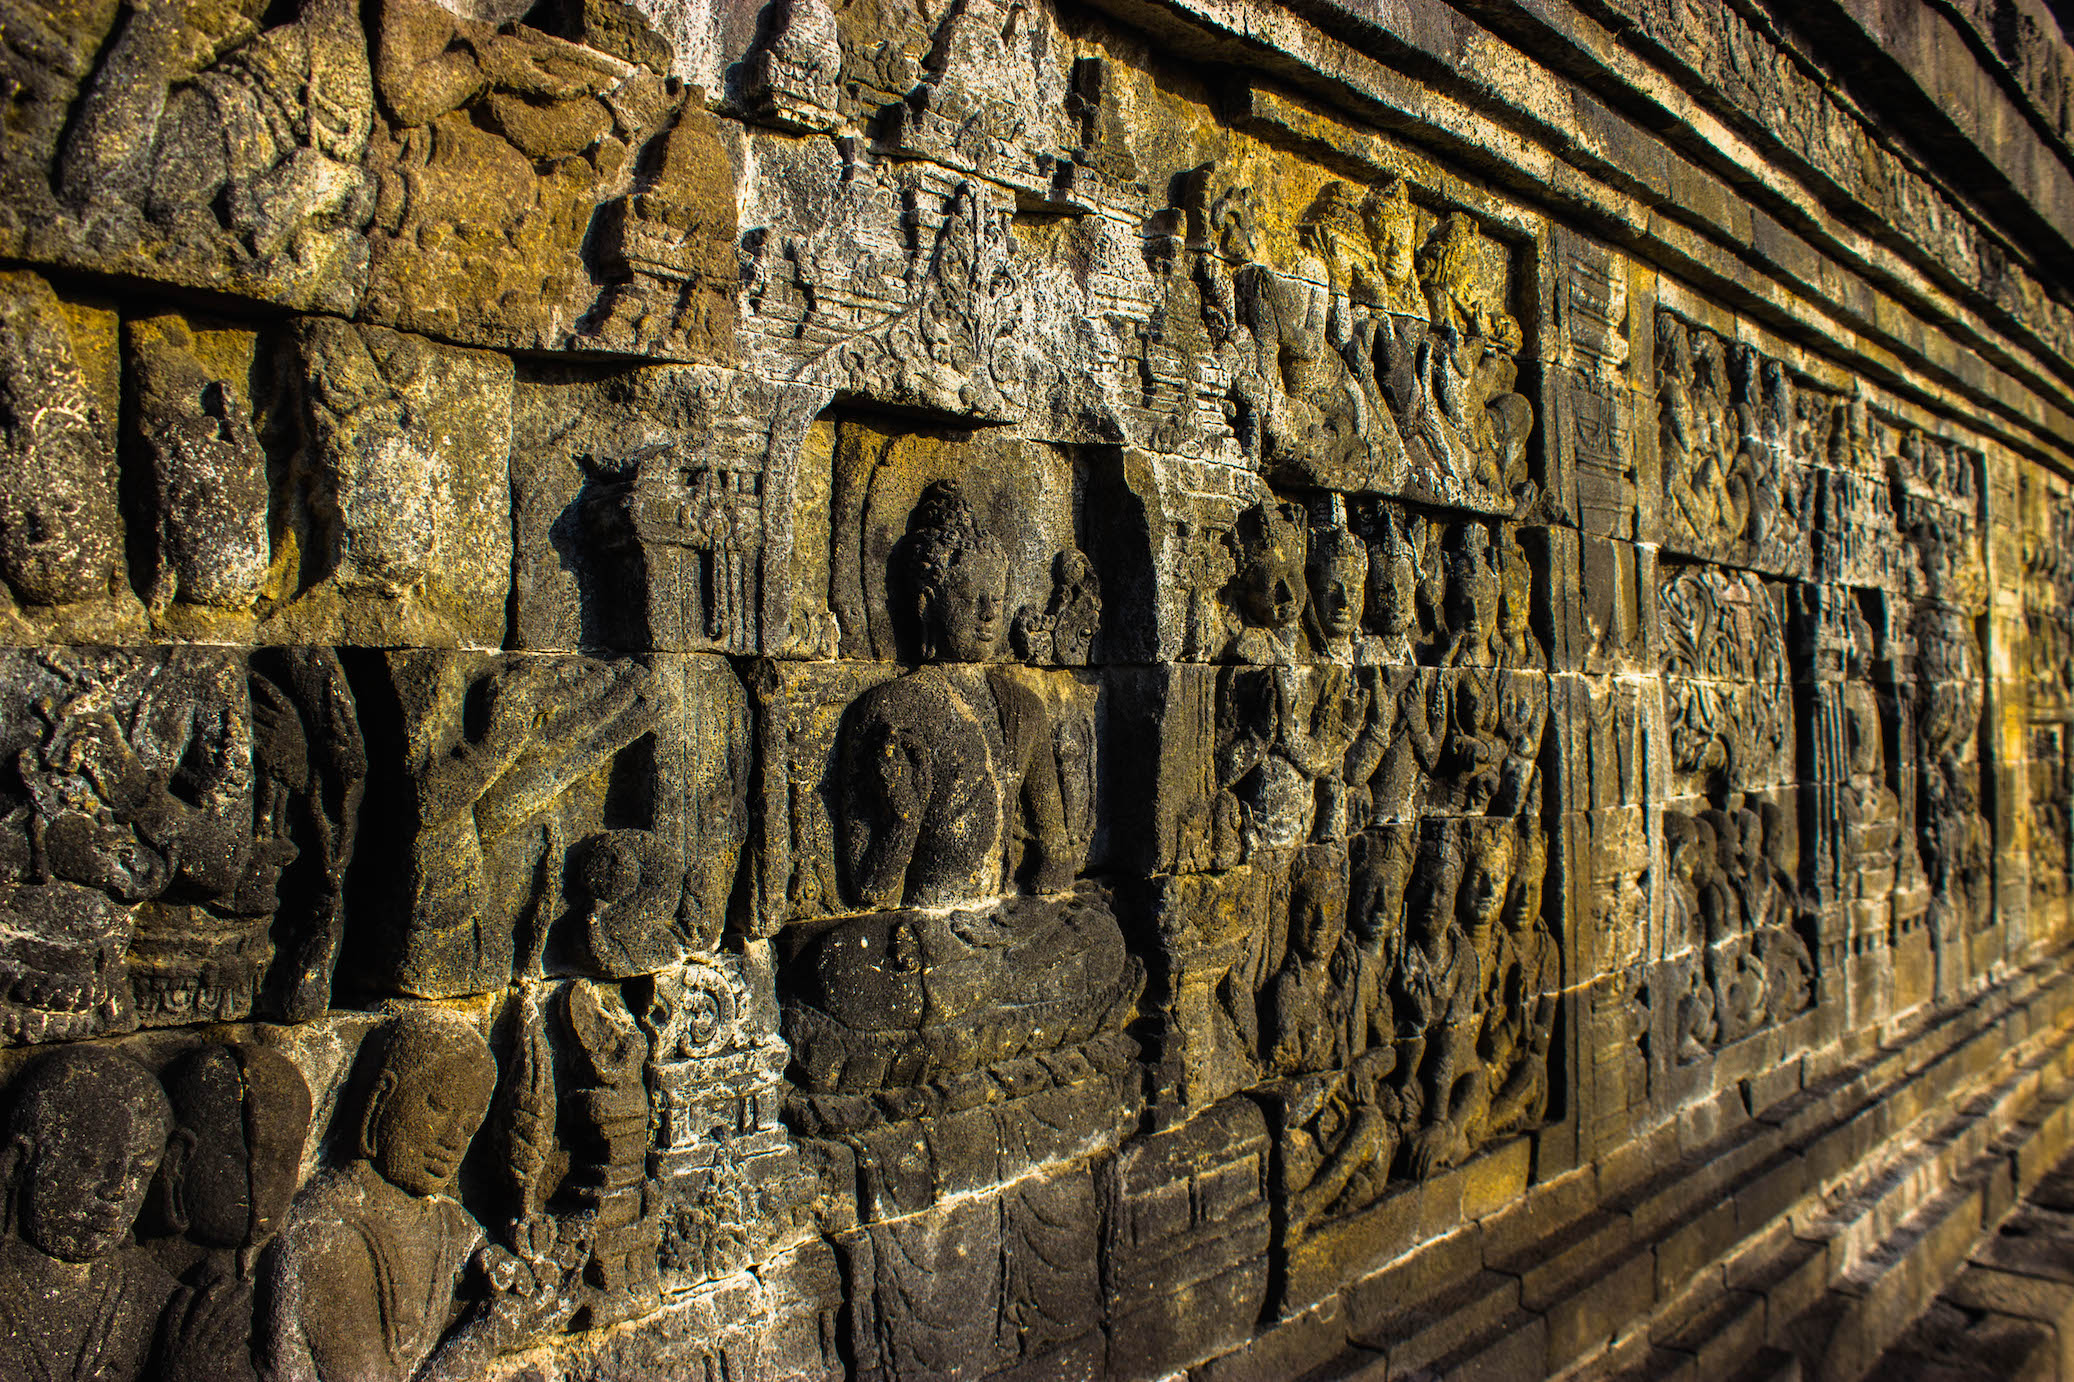 Relief carvings on the galleries of Borobudur, Indonesia